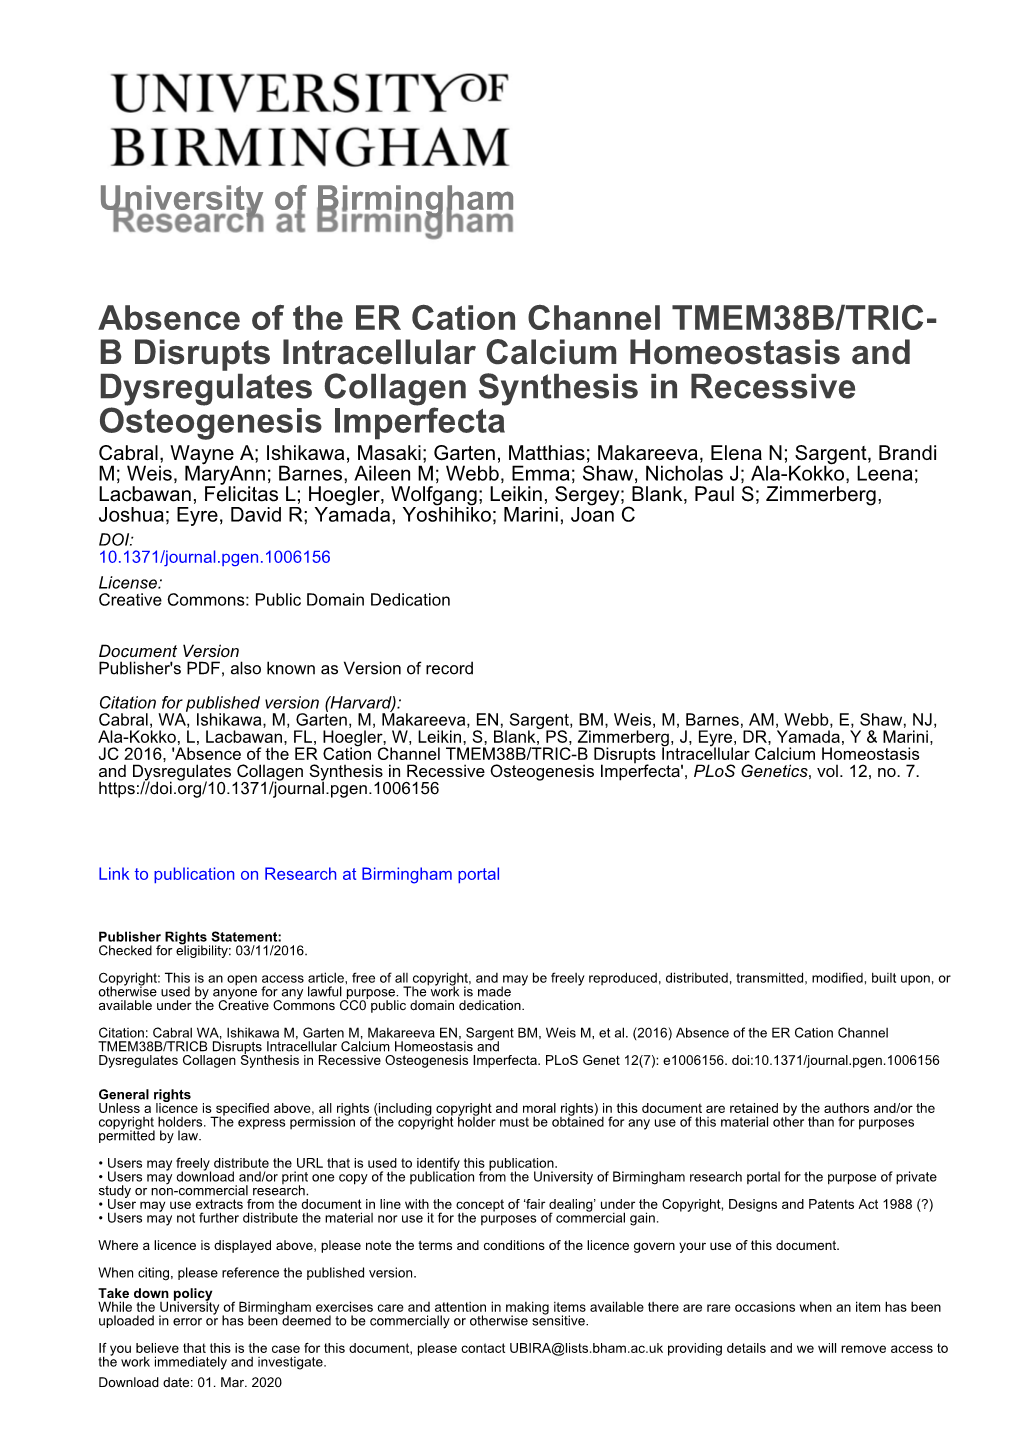 Absence of the ER Cation Channel TMEM38B/TRIC-B Disrupts